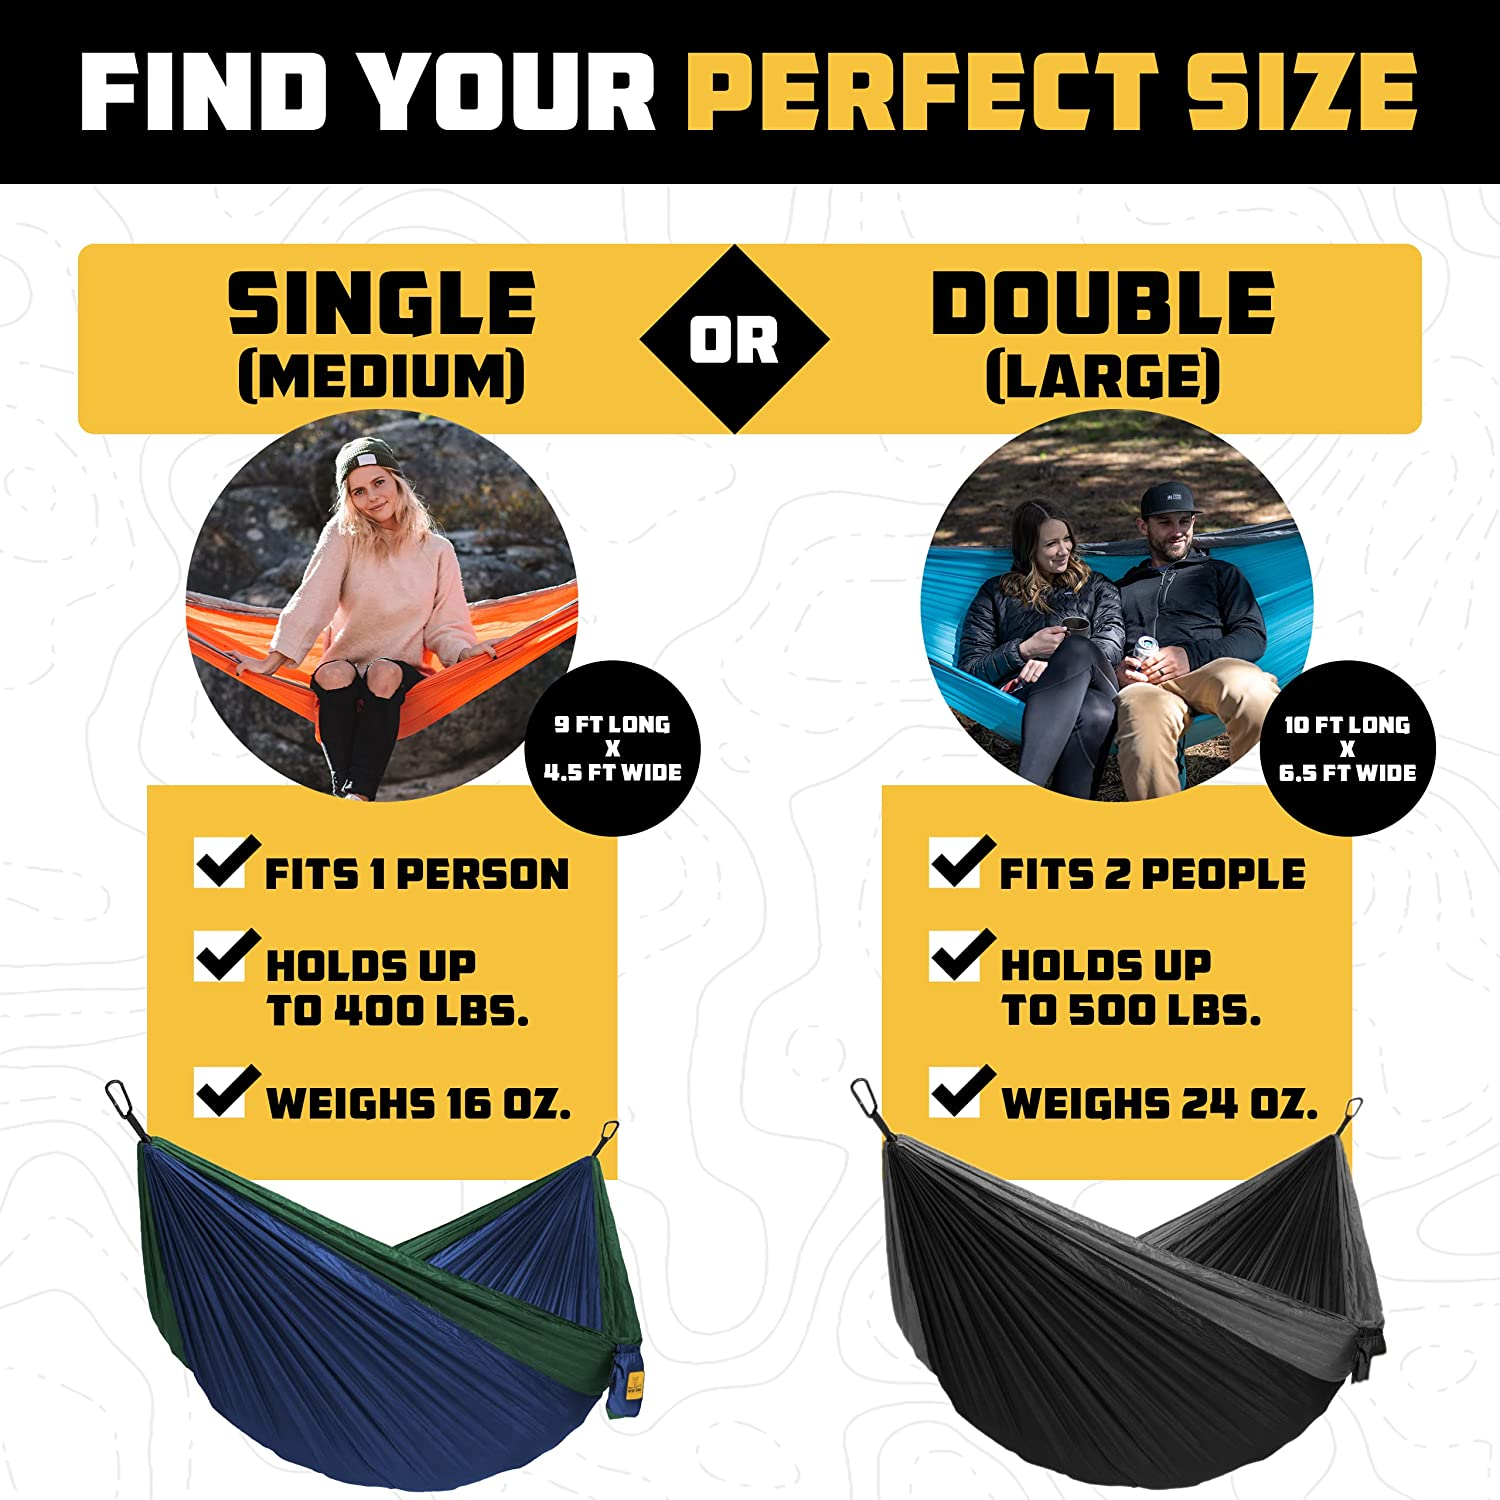 ﻿Wise Owl Outfitters Hammock for Camping Double Hammocks Gear for the Outdoors Backpacking Survival or Travel - Portable Lightweight Parachute Nylon DO